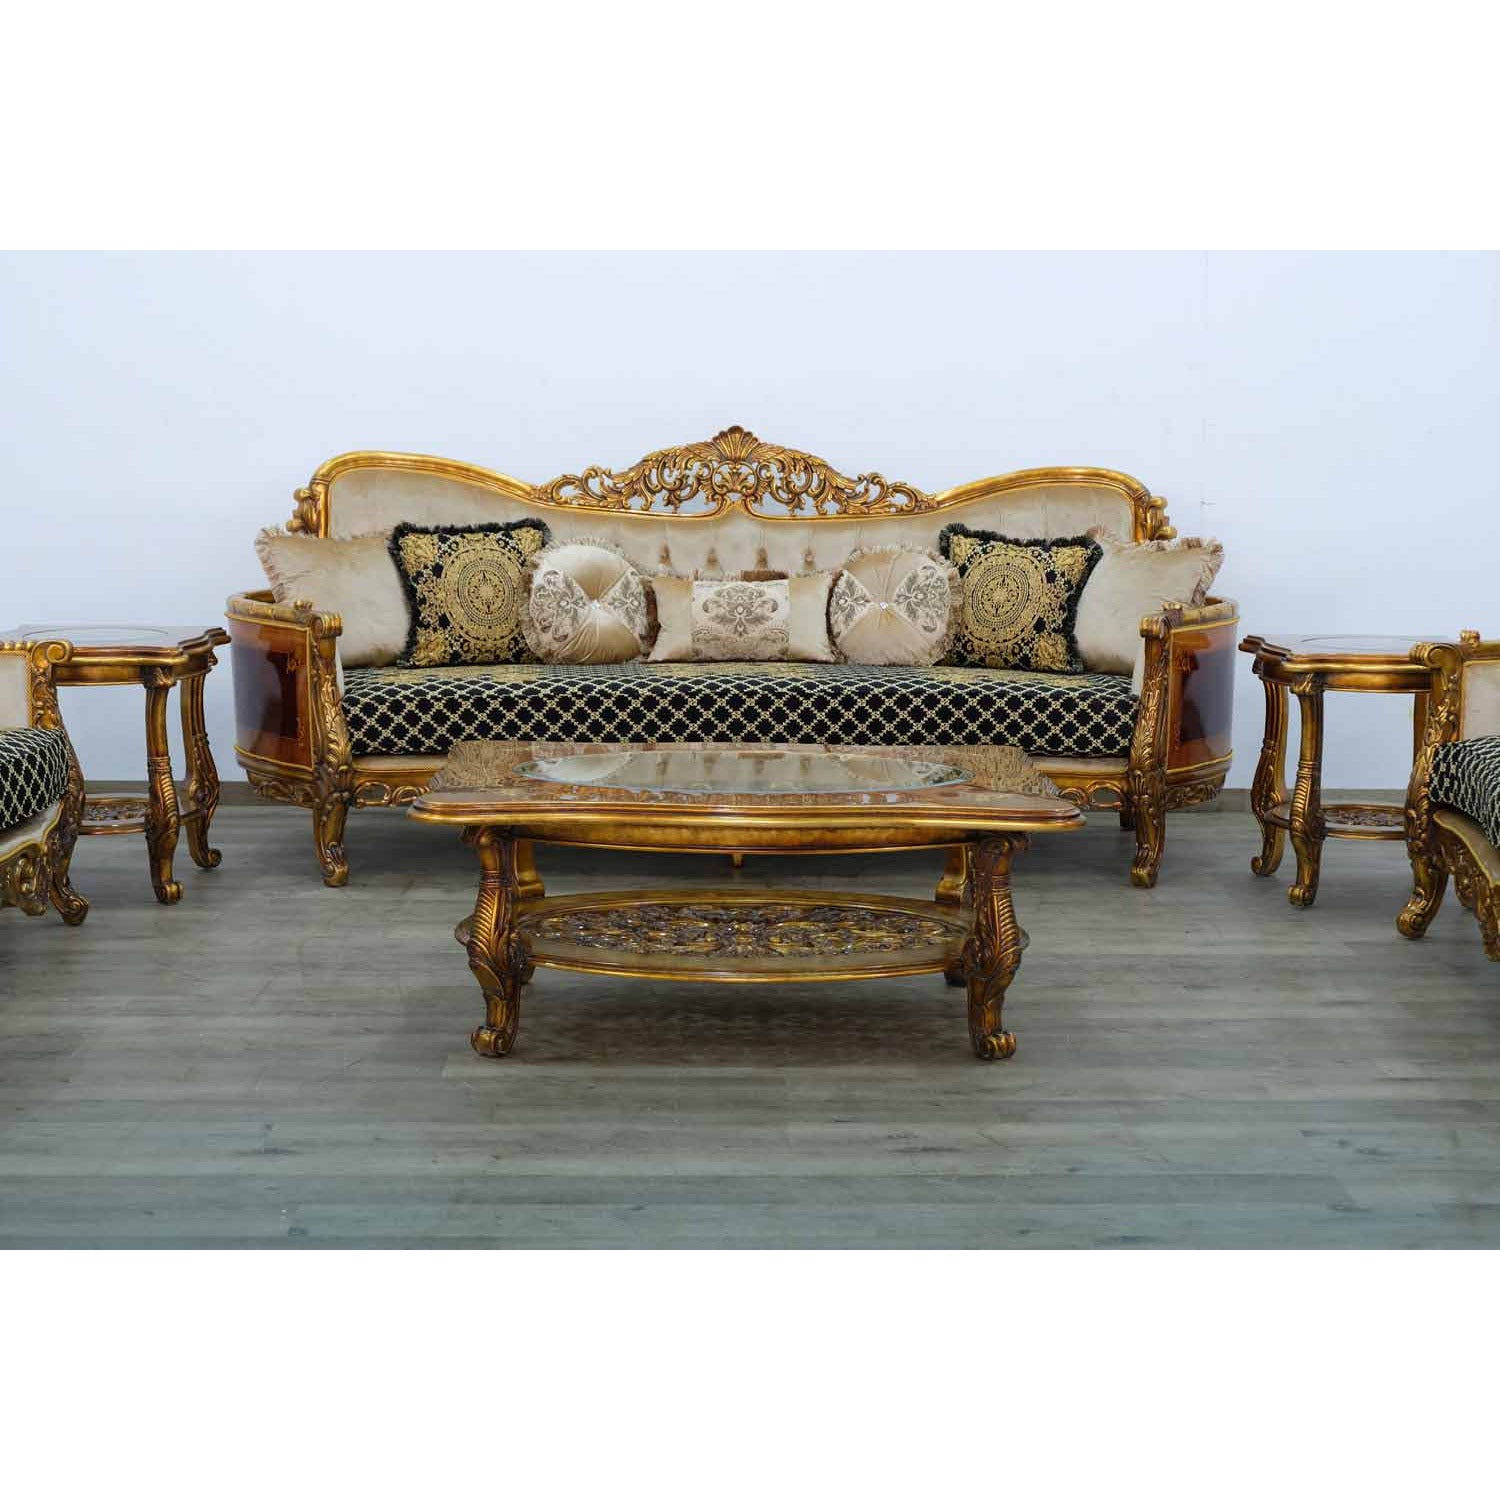 European Furniture - Maggiolini II 2 Piece Living Room Set in Black and Gold - 31059-2SET - New Star Living